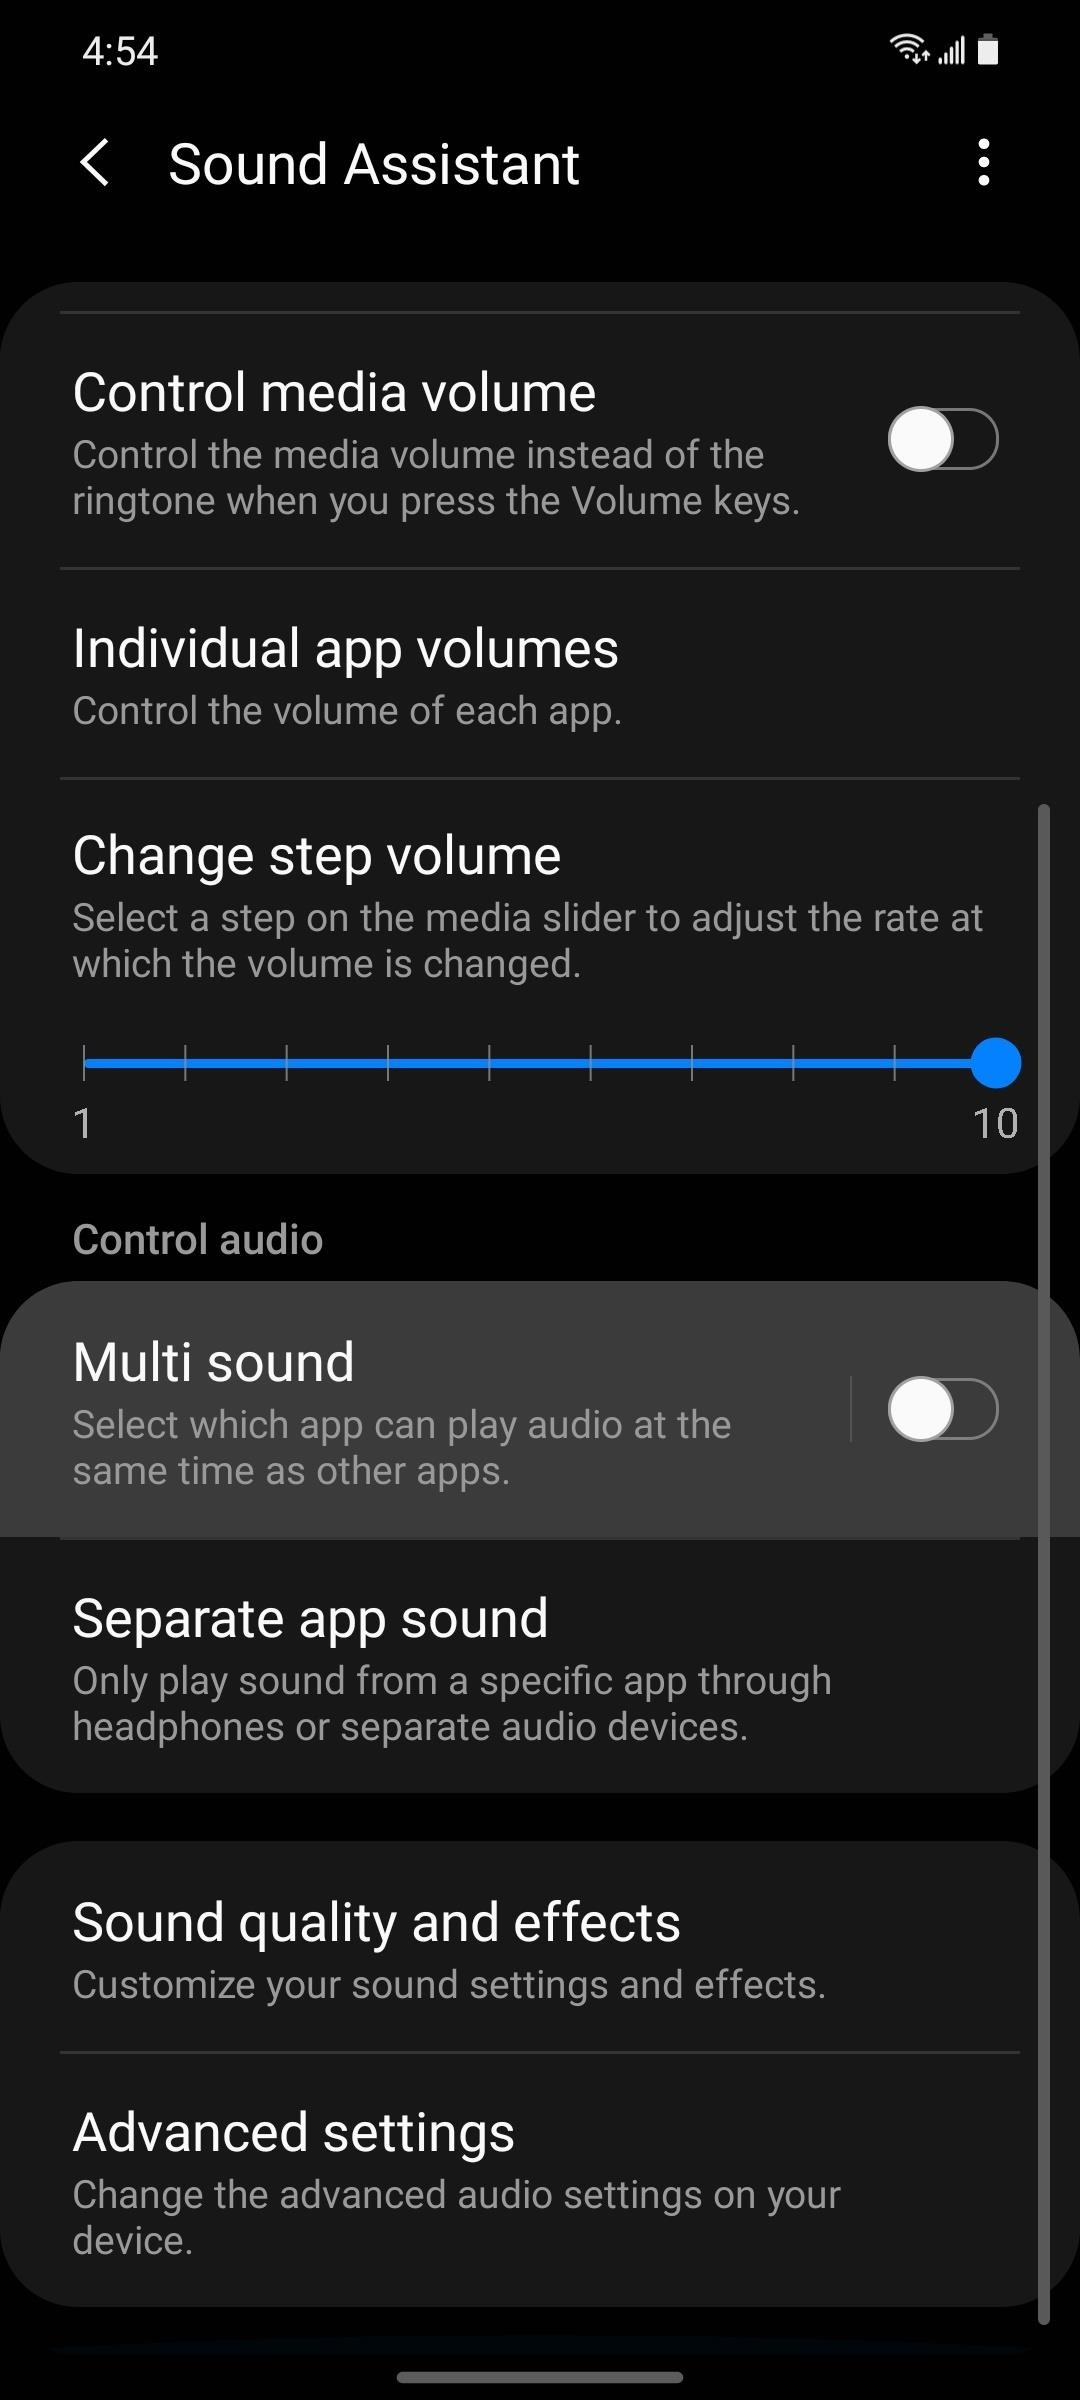 How to Play Sound from 2 Apps at Once on Your Samsung Galaxy Phone